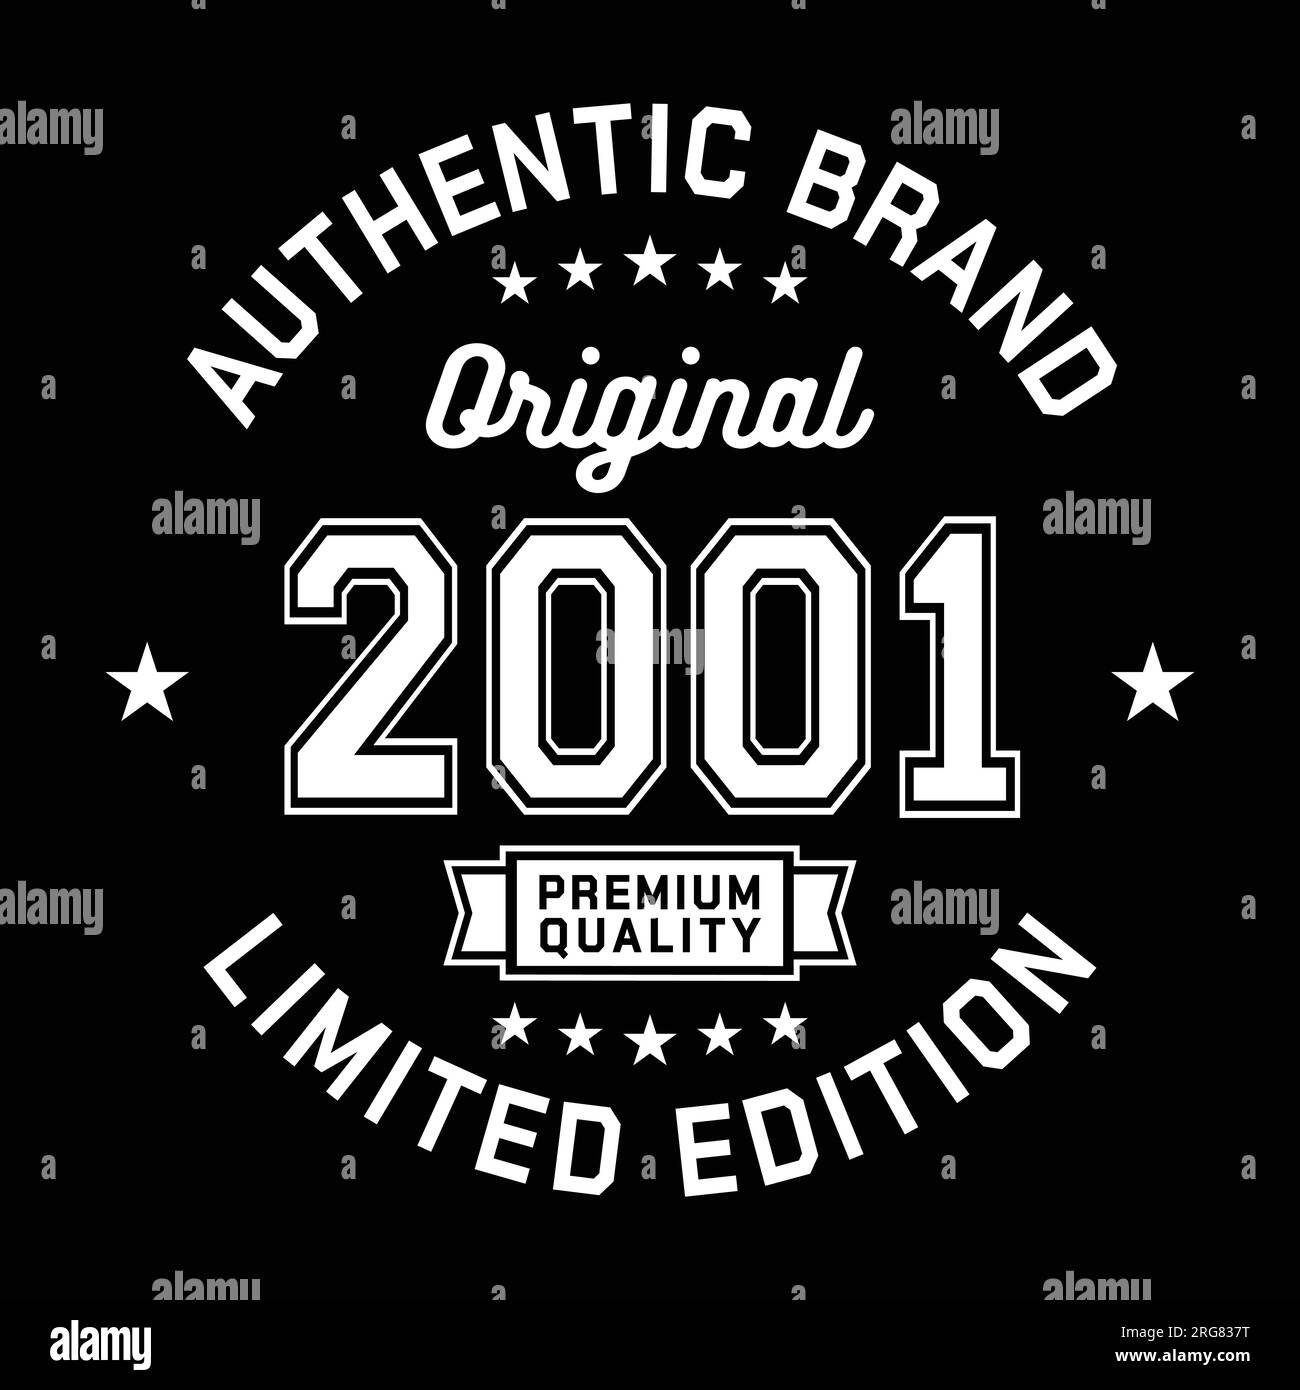 2001 Authentic brand. Apparel fashion design. Graphic design for t-shirt. Vector and illustration. Stock Vector